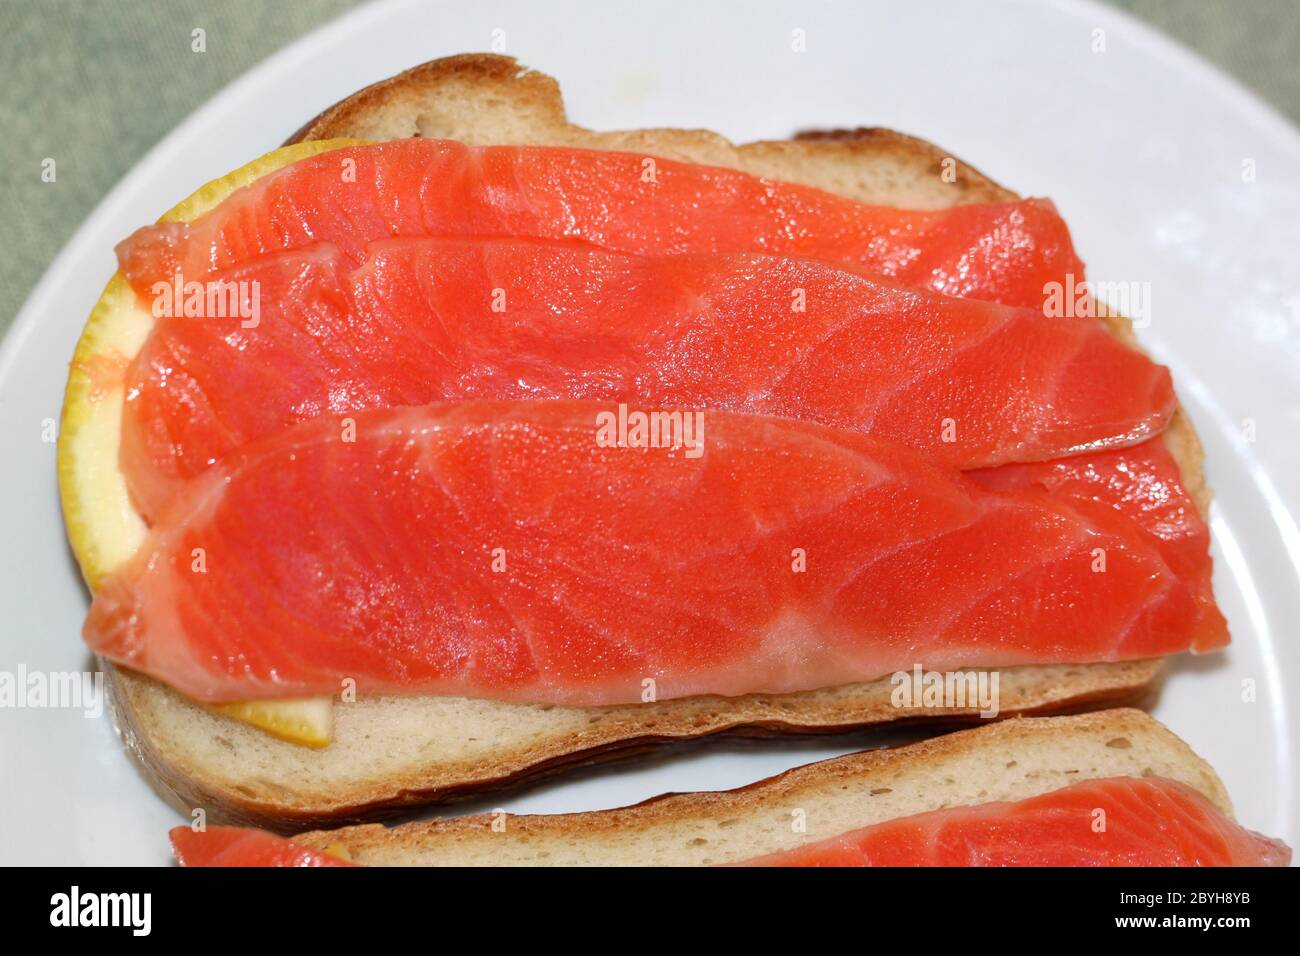 Sandwich with red fish Stock Photo